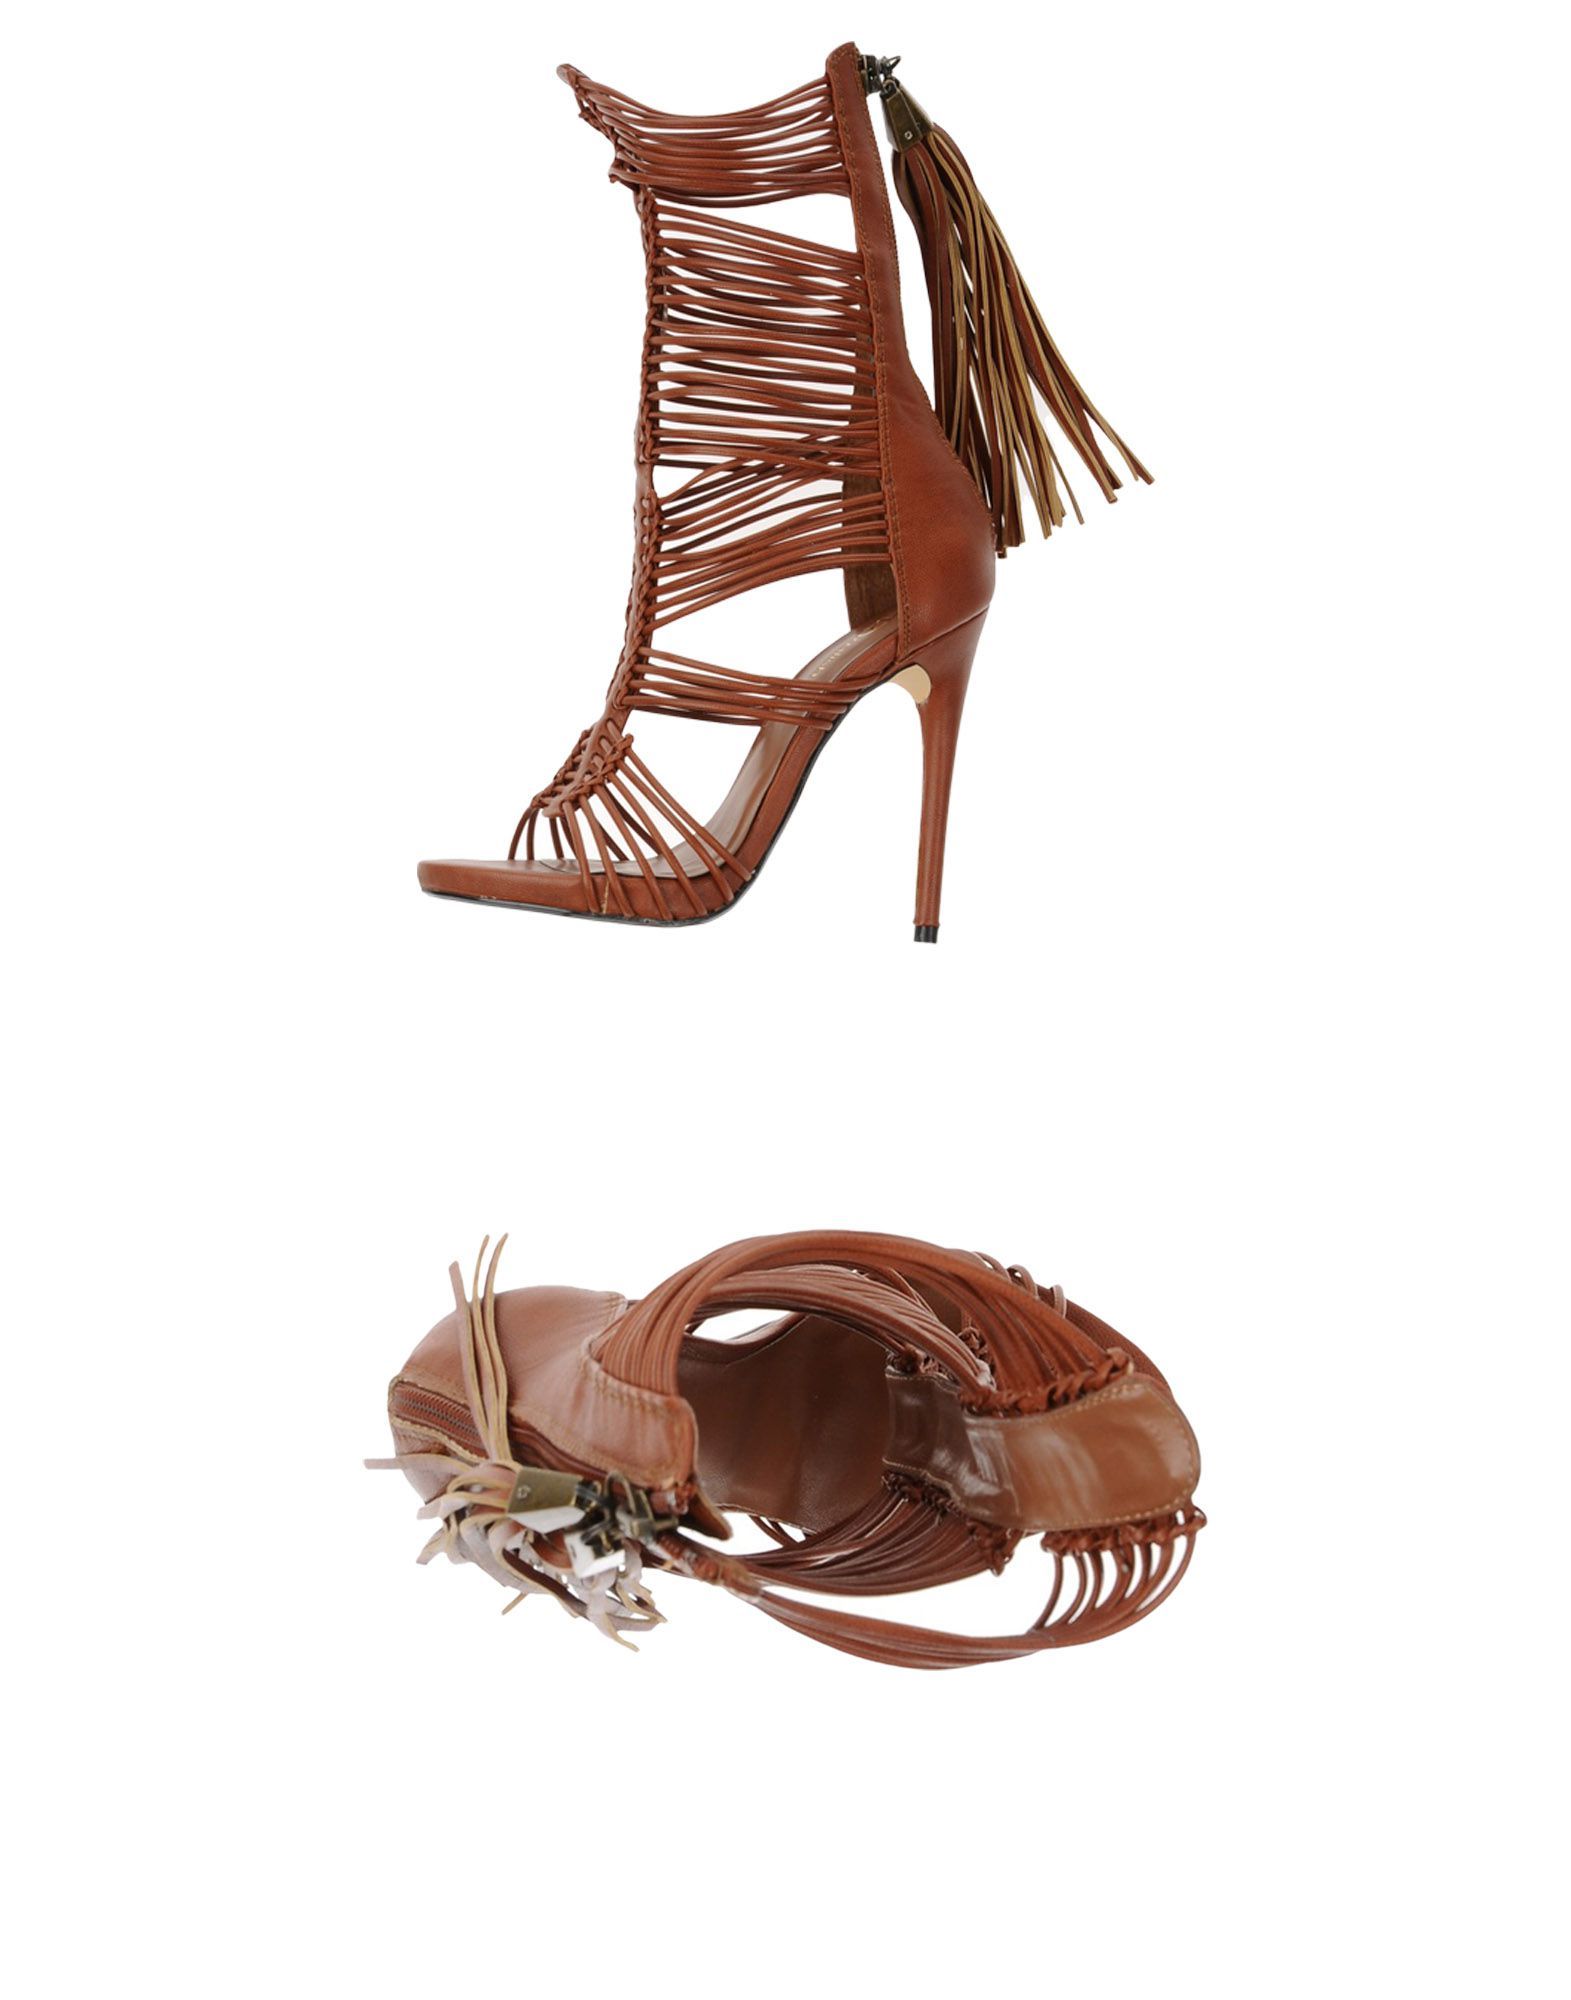 faux leather, no appliqu�s, solid colour, zip, round toeline, stiletto heel, fully lined, rubber sole, gladiator